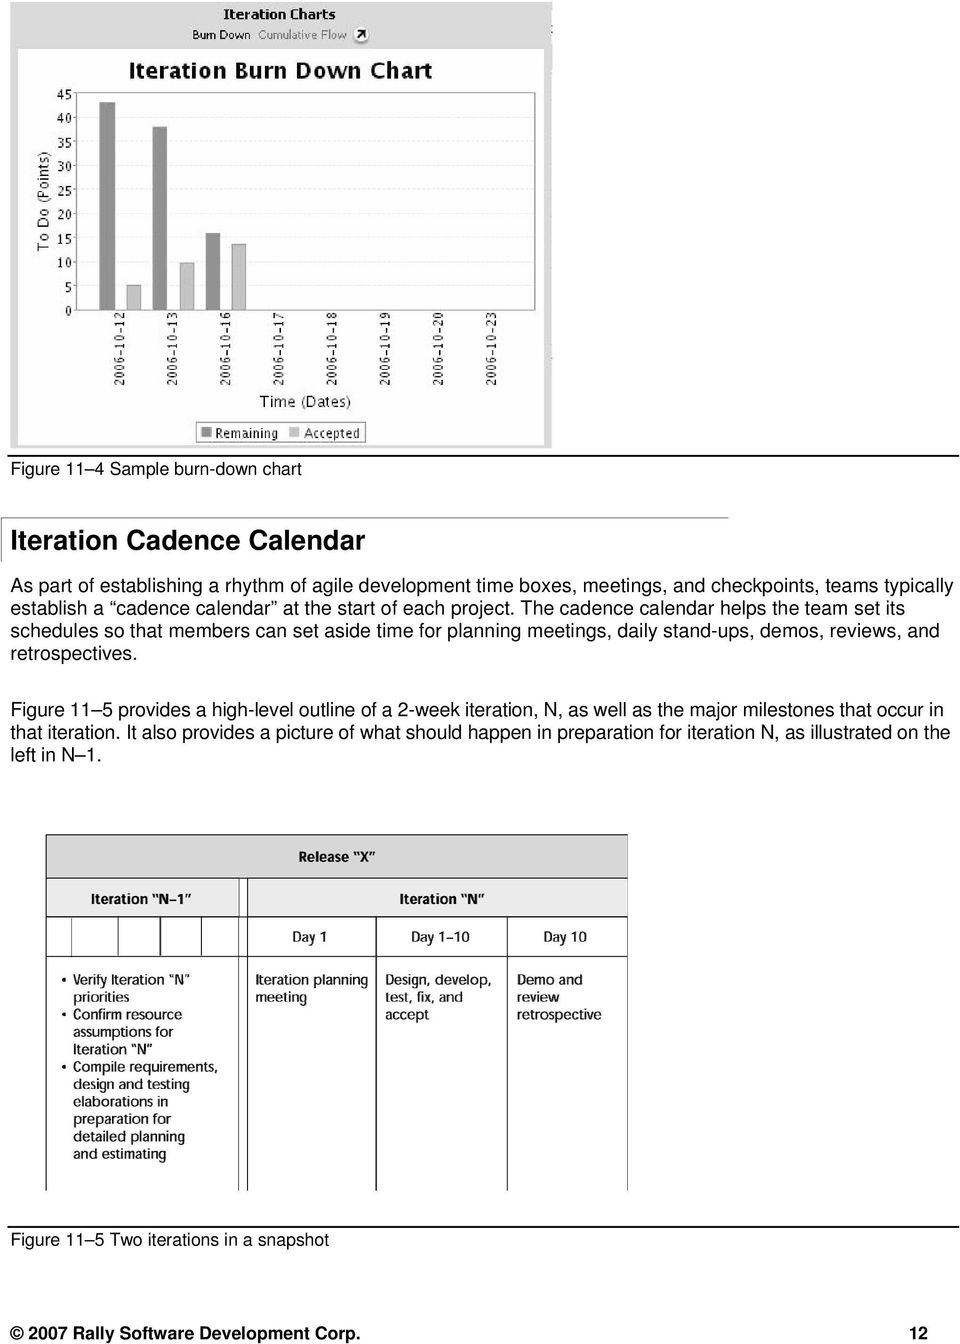 The cadence calendar helps the team set its schedules so that members can set aside time for planning meetings, daily stand-ups, demos, reviews, and retrospectives.